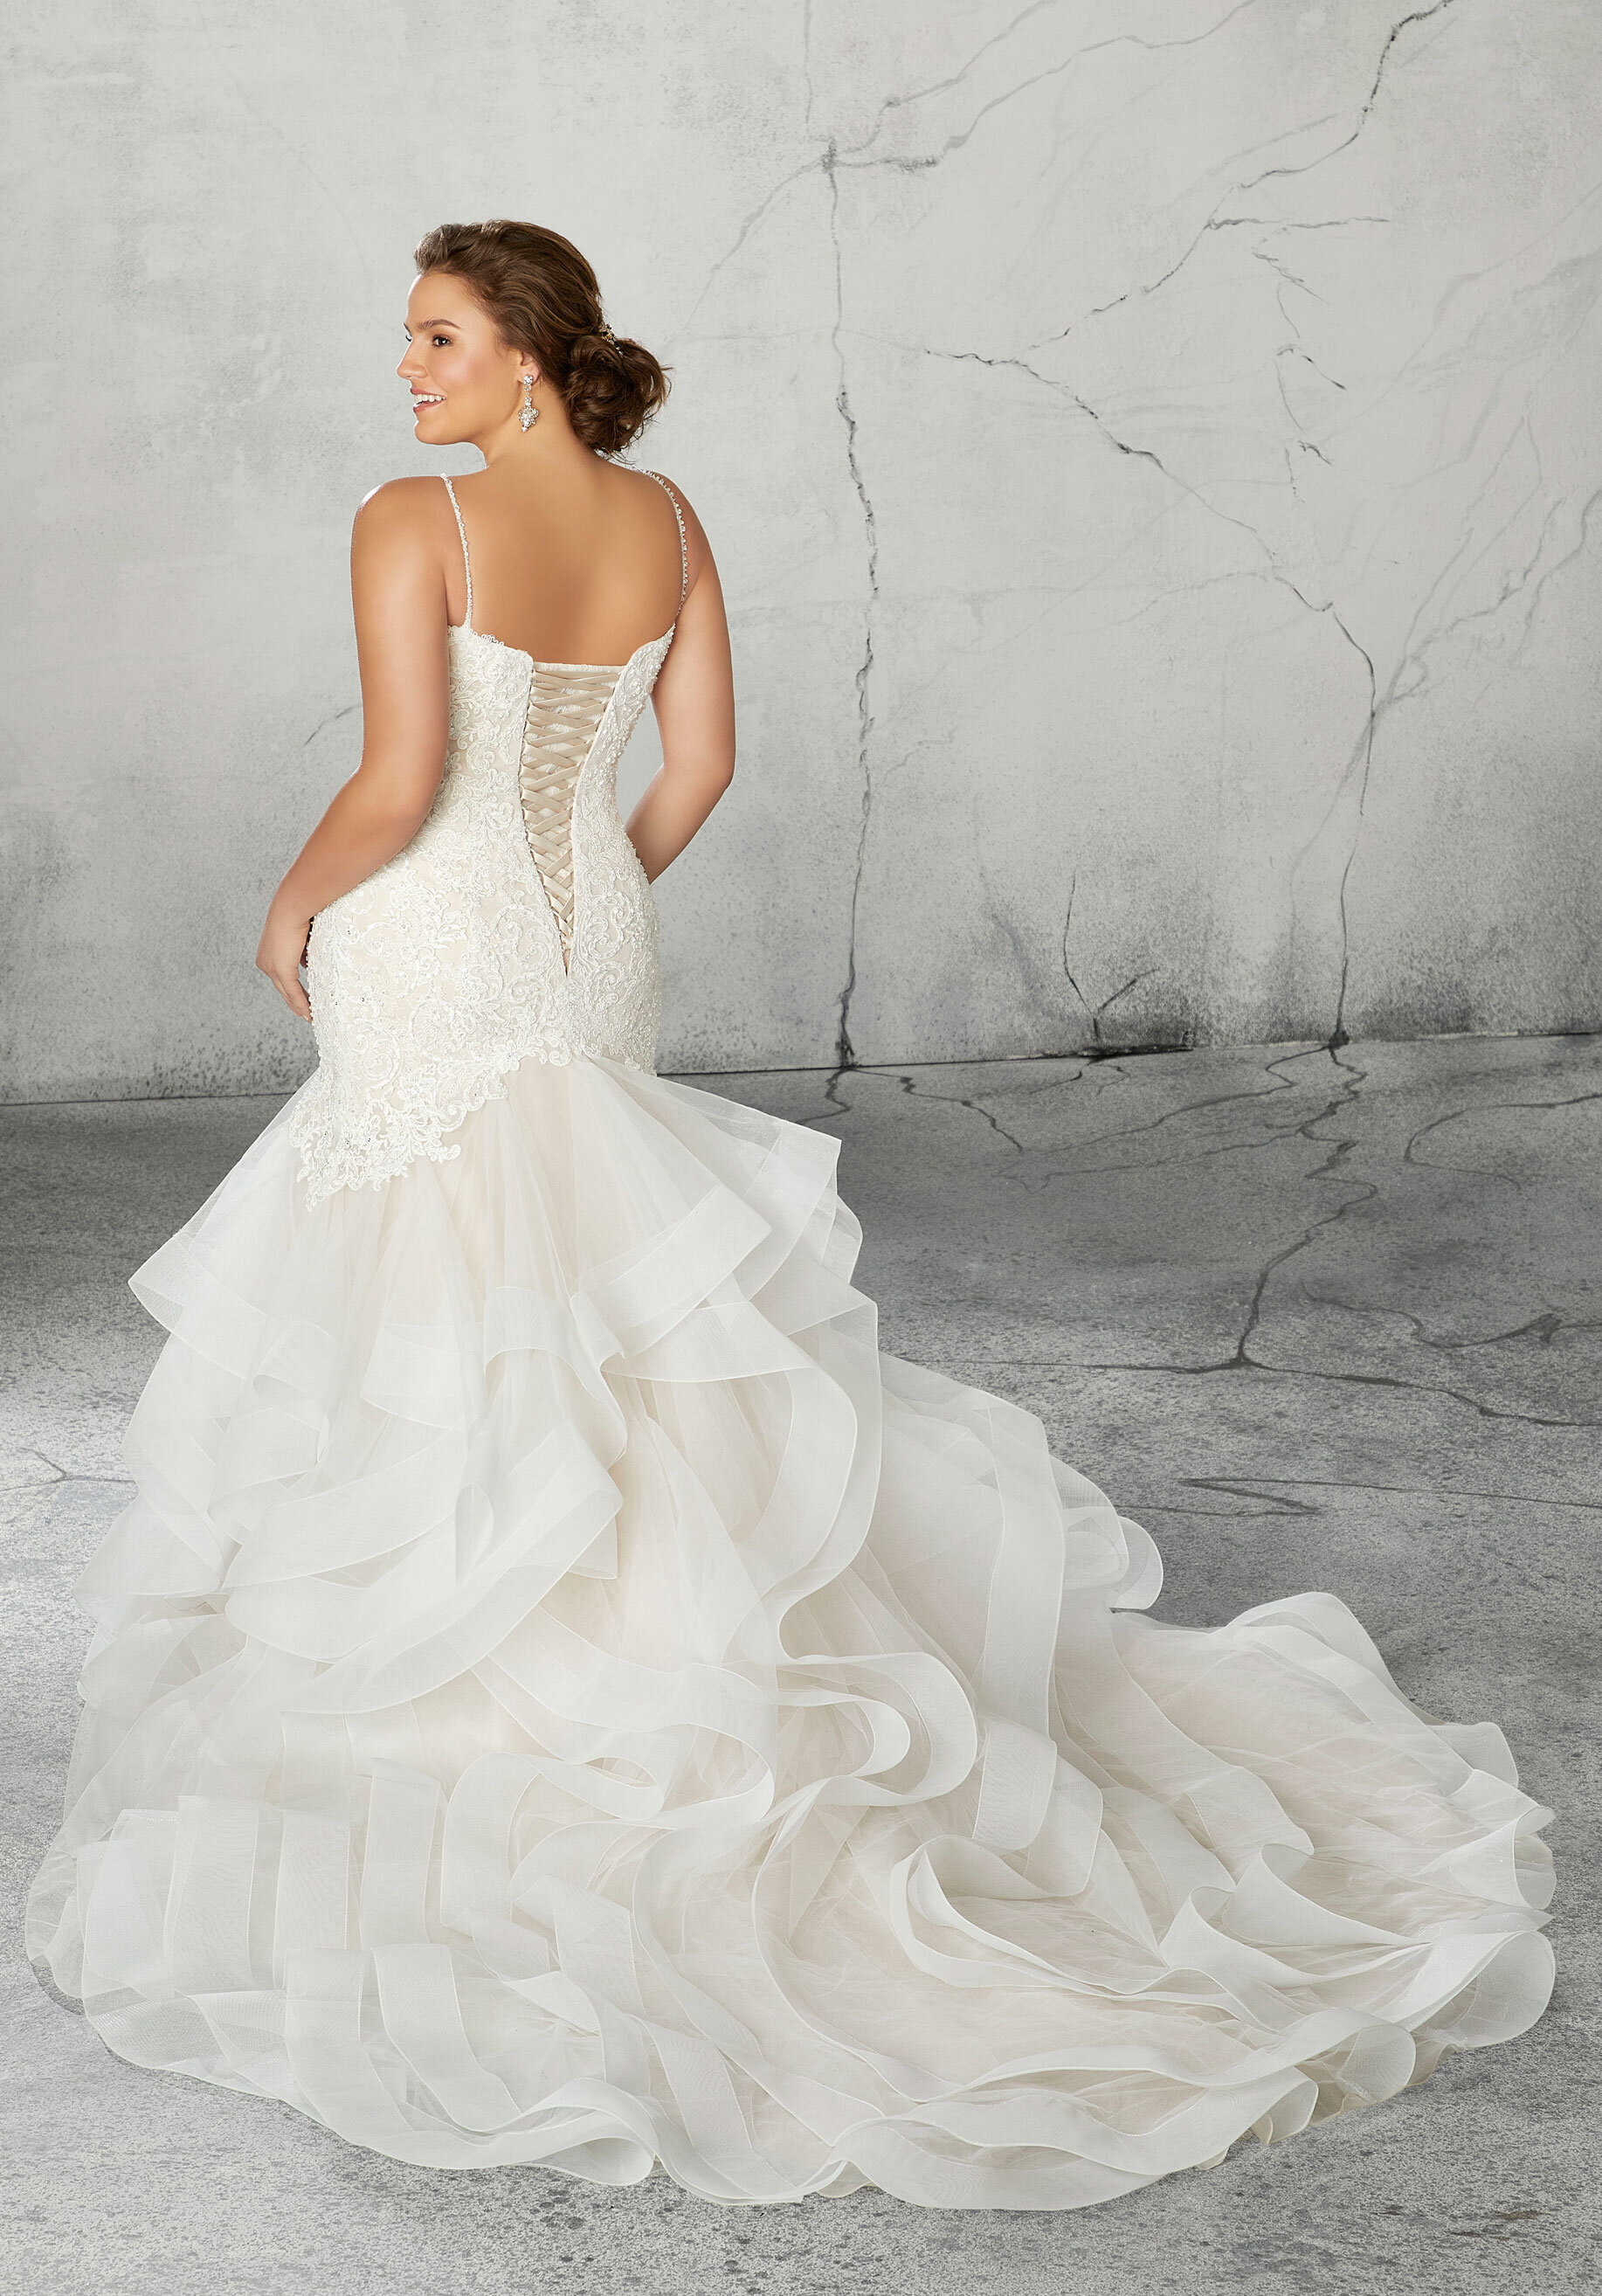 Brides-by-Young-Curvy-Plus-Size-Bridal-Chicago-Illinois-Indianapolis-Indiana-New-Jersey-Wedding-Dress-Morilee-3271-Raquel-Back.jpg